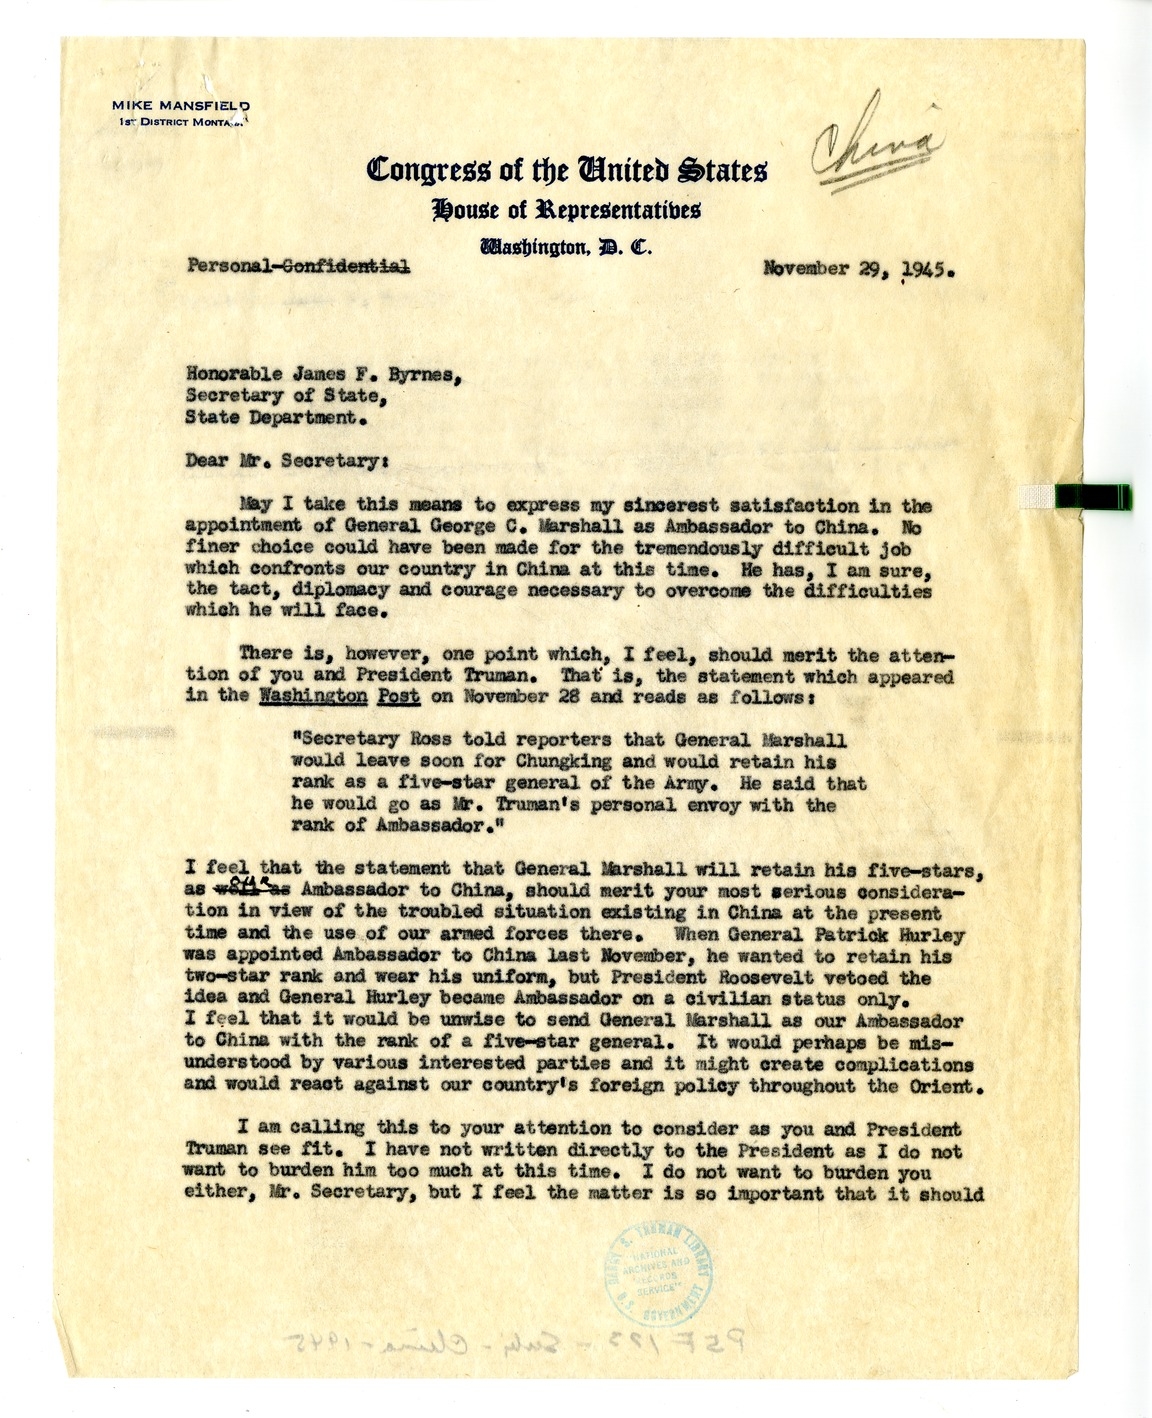 Memorandum from Representative Mike Mansfield to Matthew Connelly, with Attachment